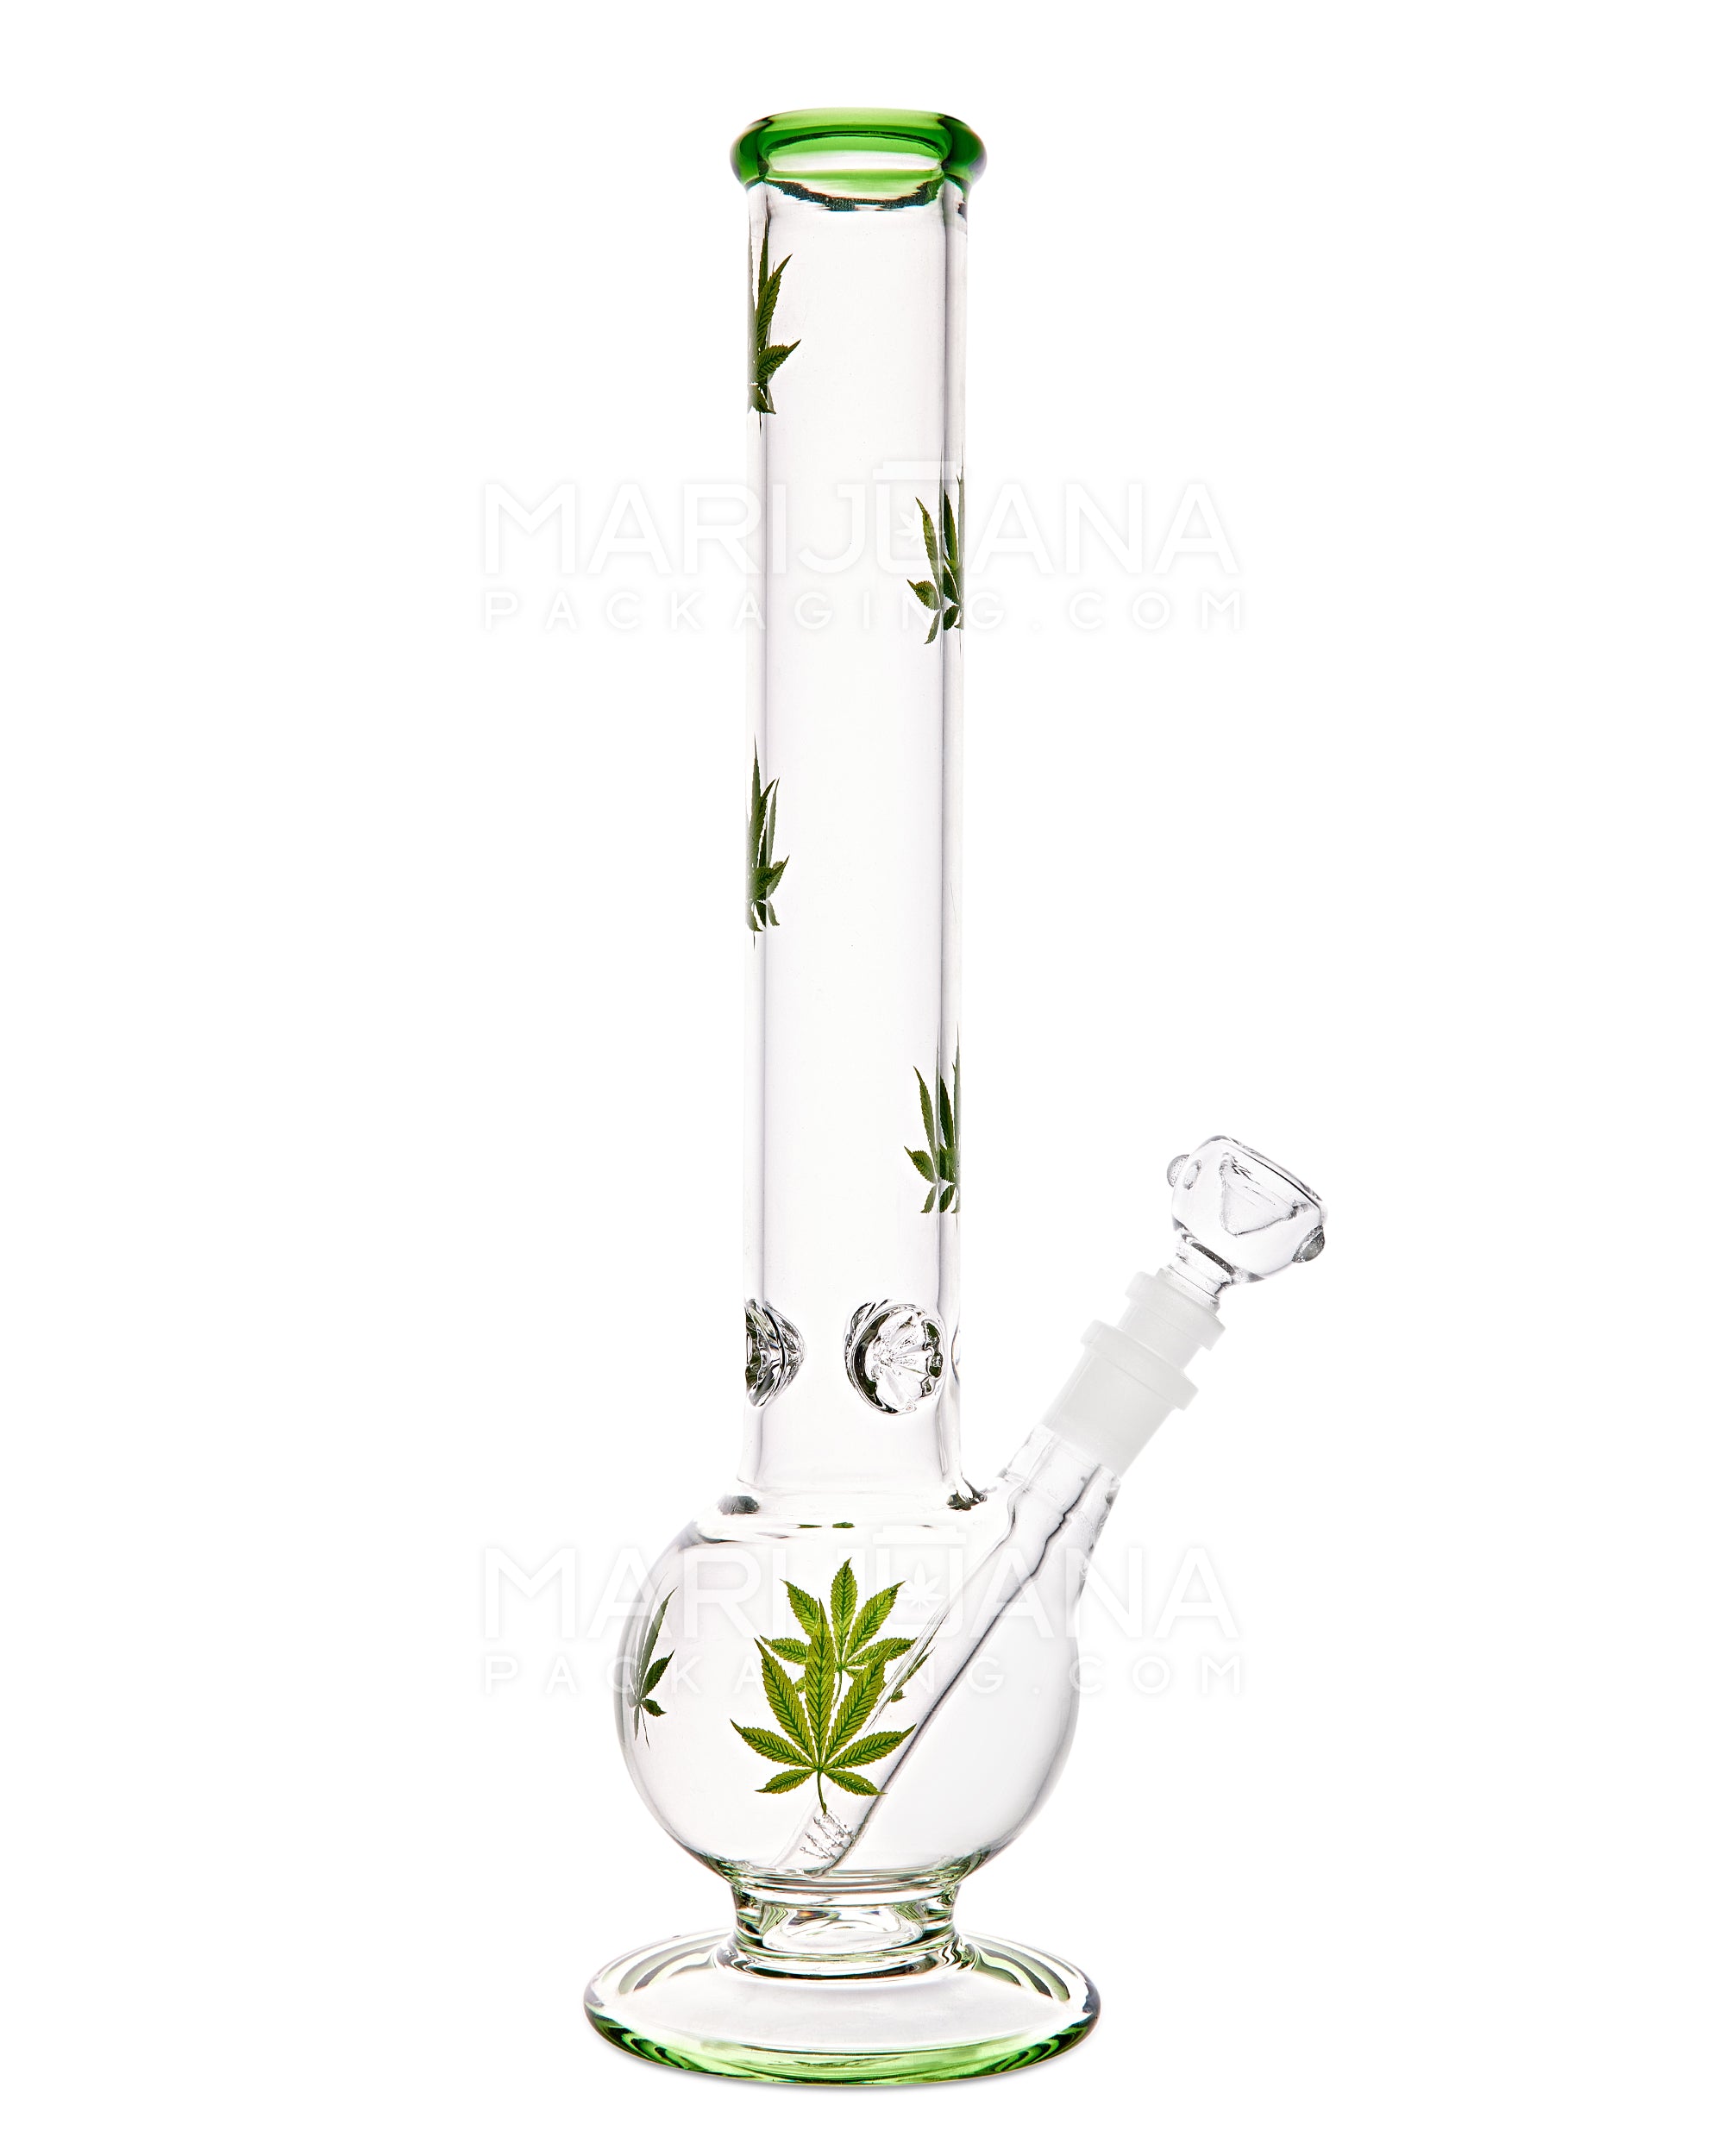 Straight Neck Decal Diffused Downstem Glass Egg Water Pipe w/ Ice Catcher | 14in Tall - 18mm Bowl - Green - 1